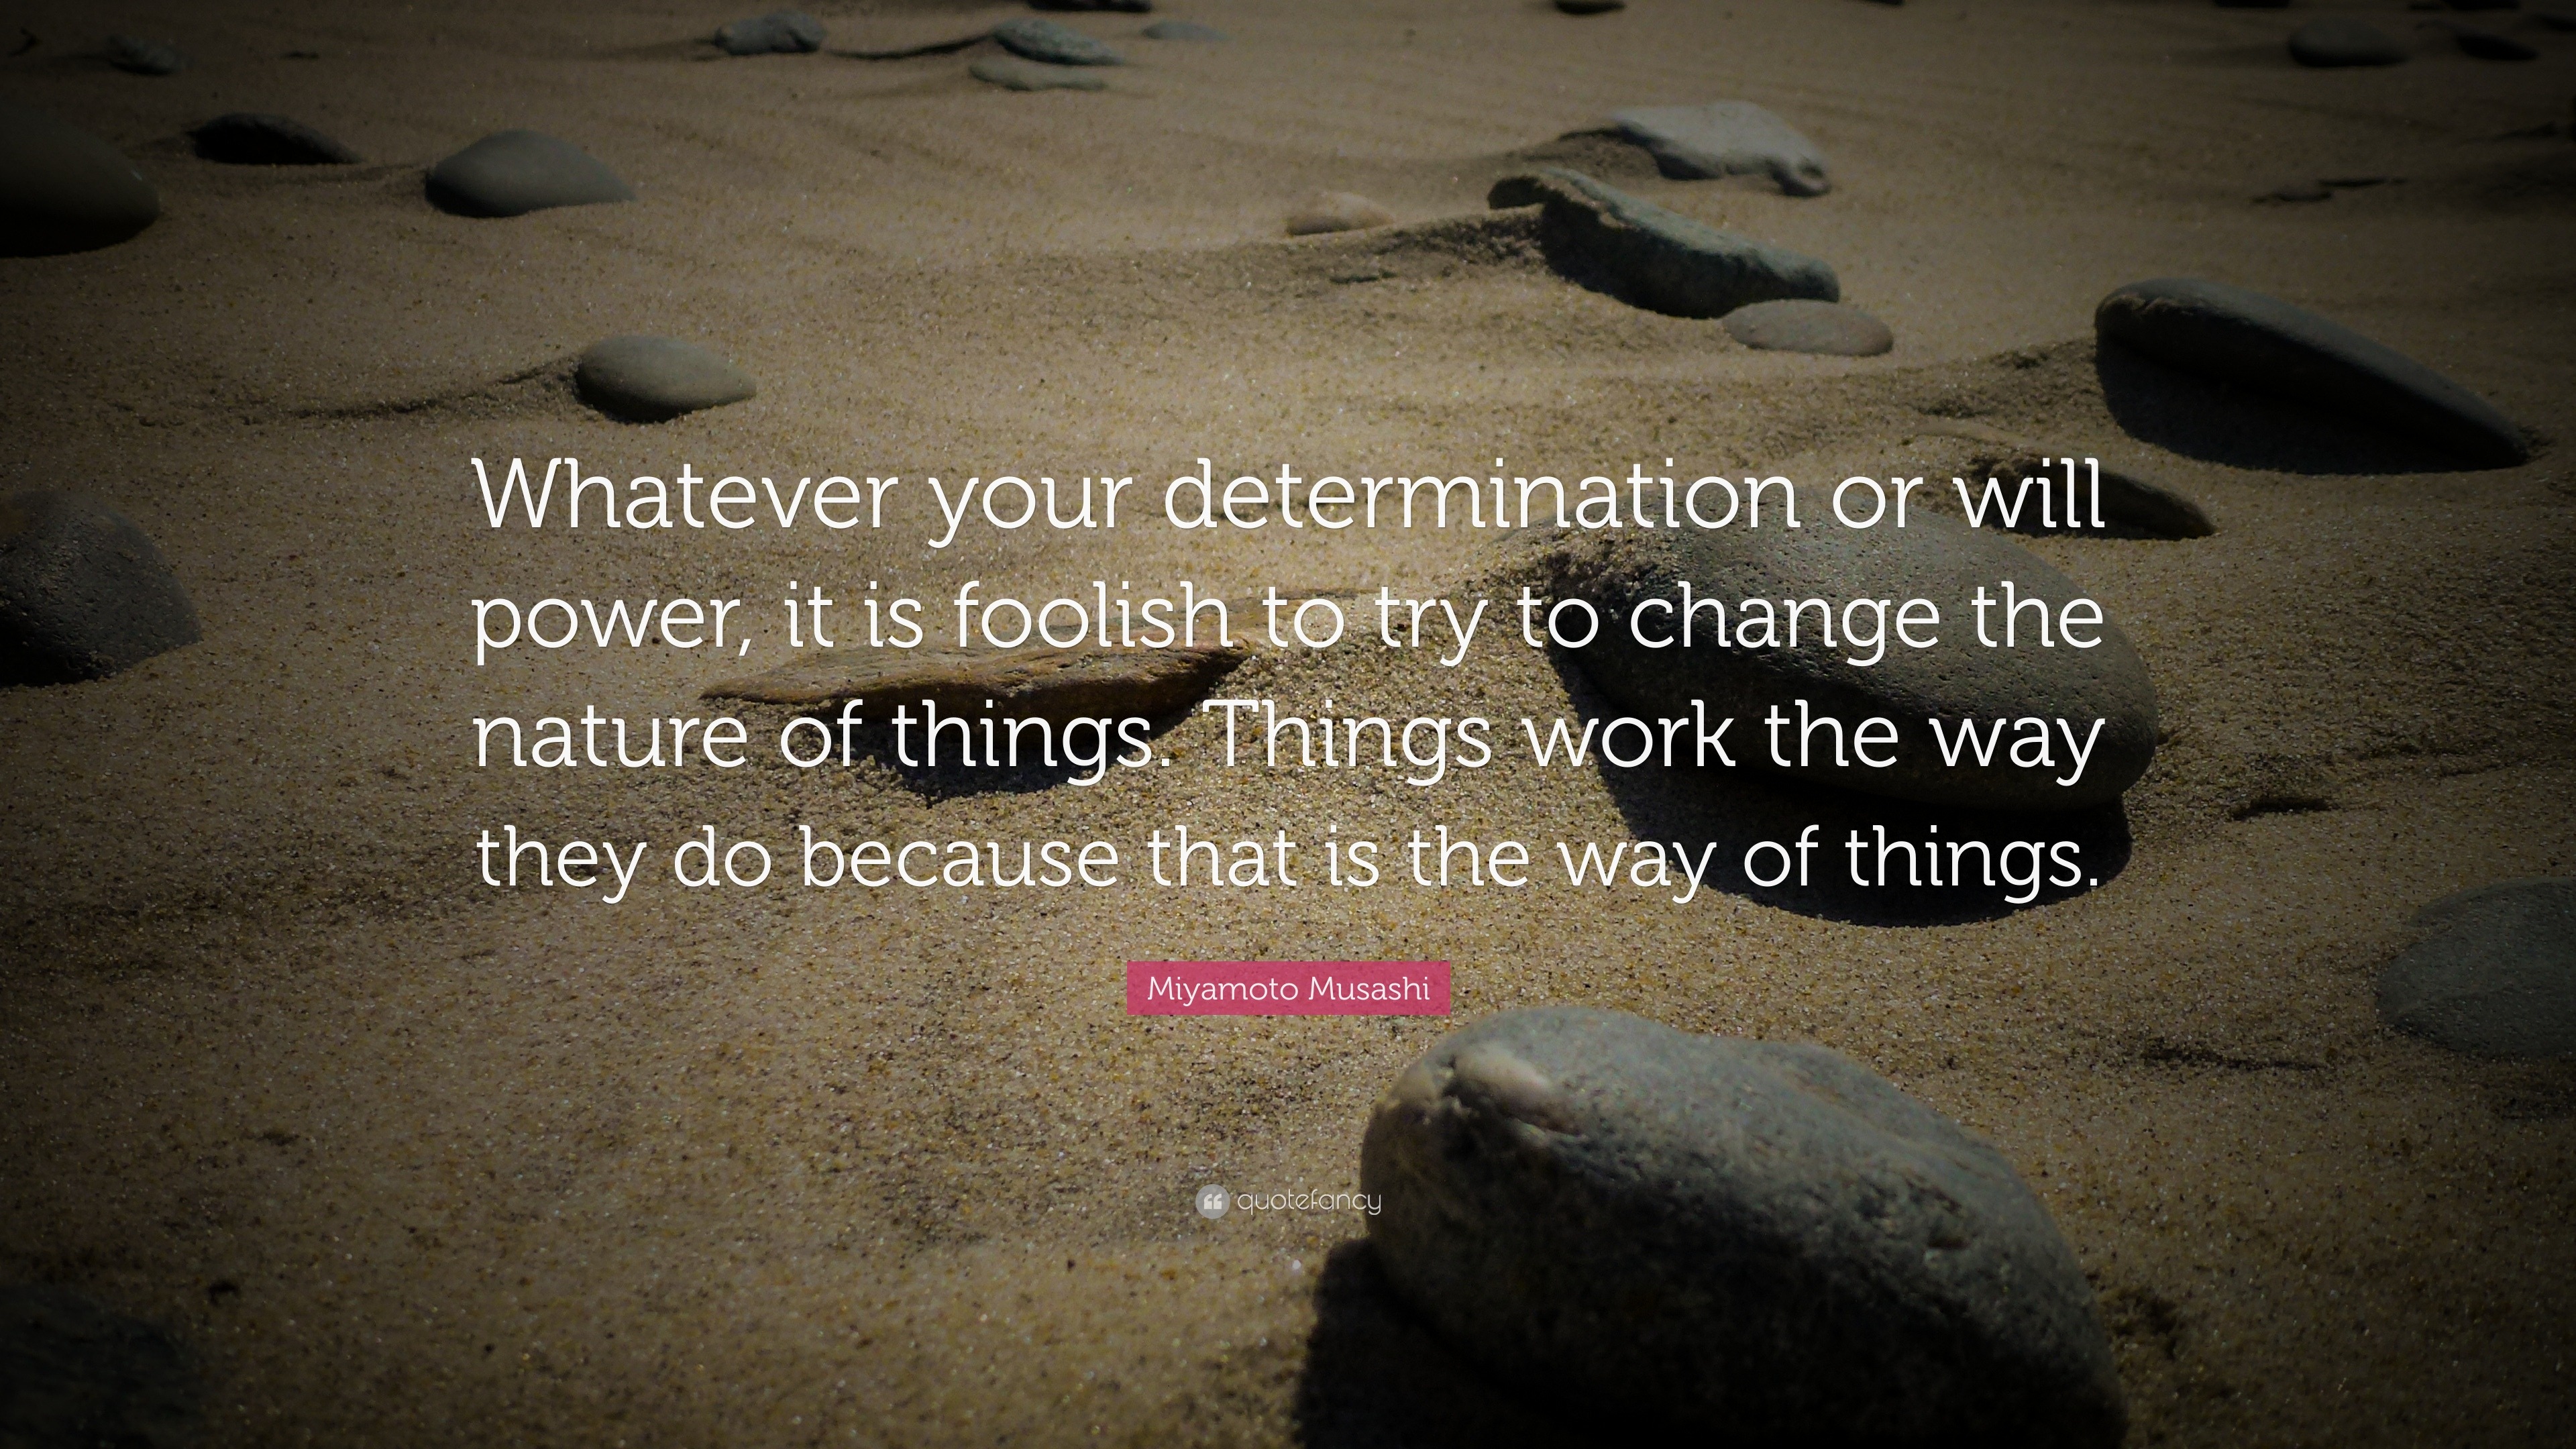 Determination Quotes “Whatever your determination or will power it is foolish to try